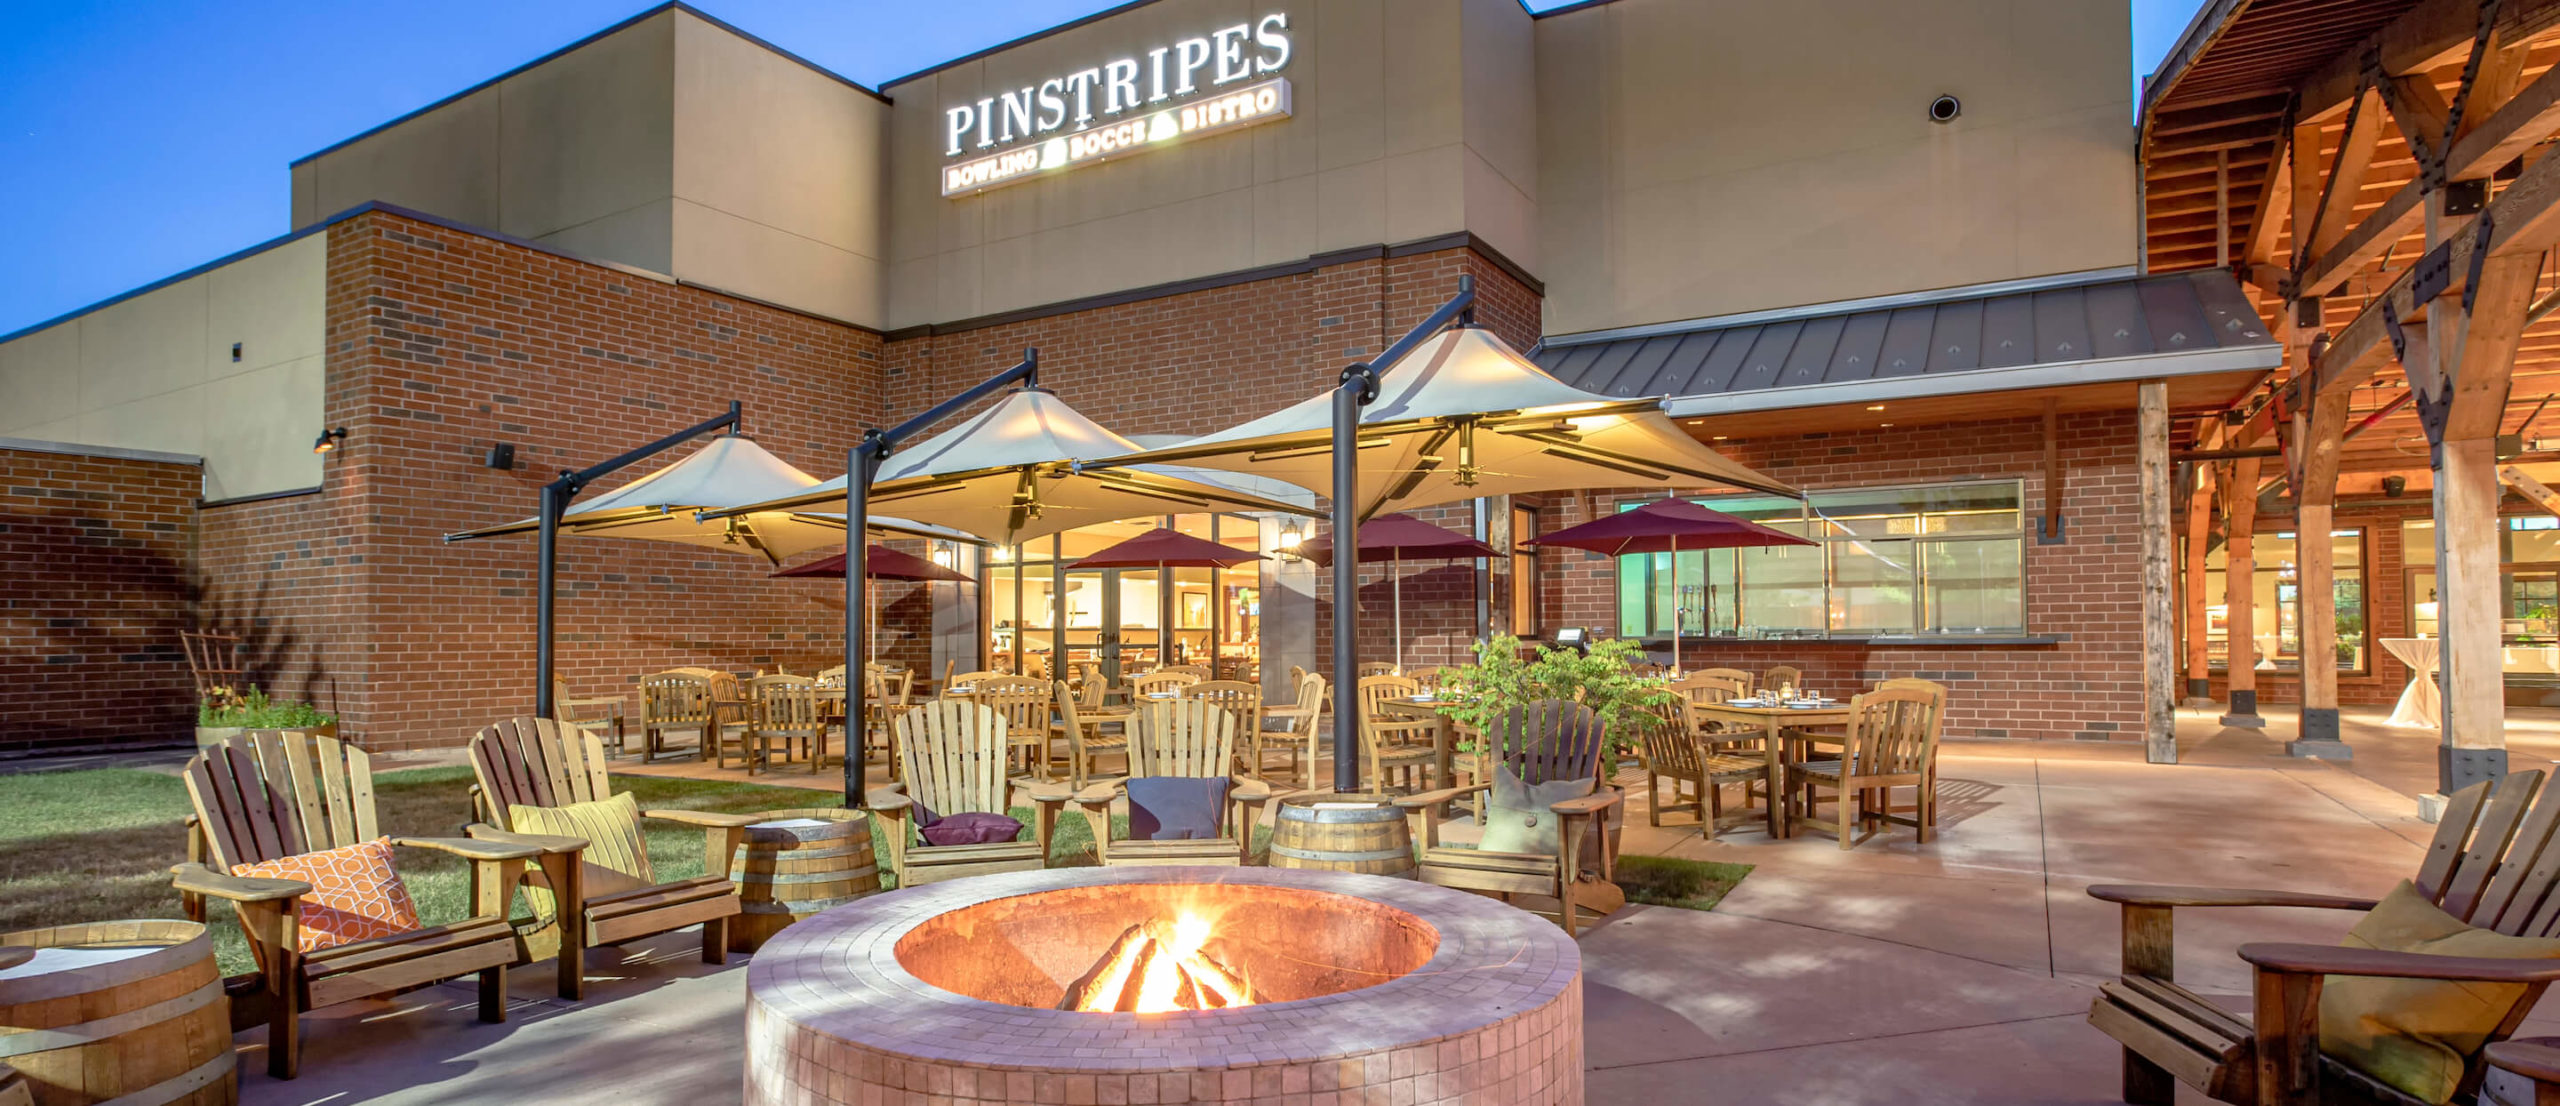 pinstripes-south-barrington-italian-bistro-bowling-bocce-events